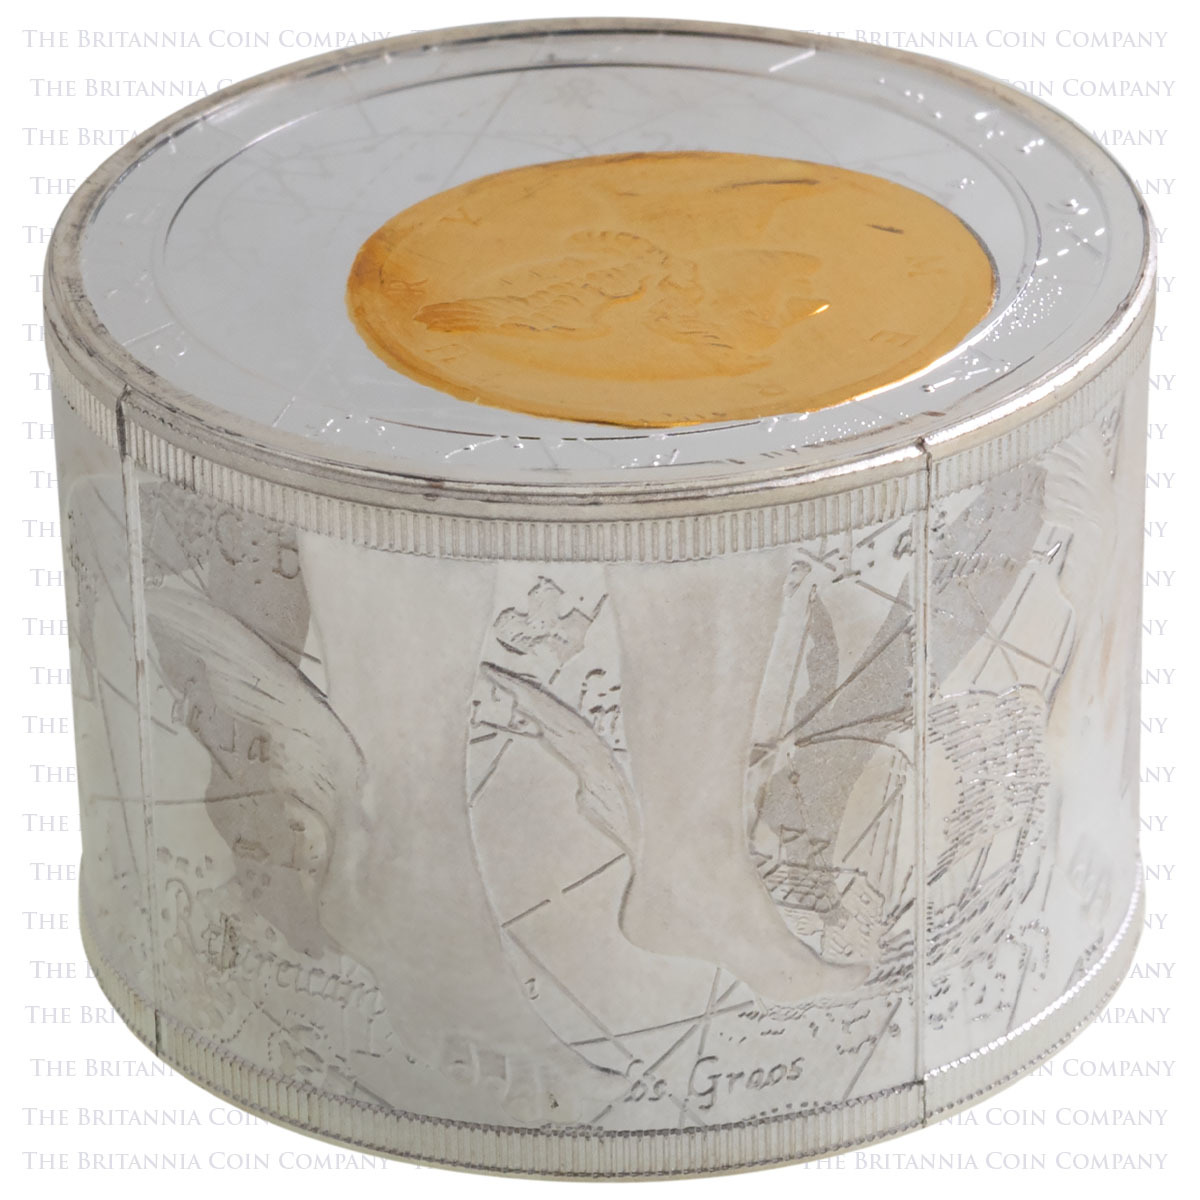 2013 Niue Fortuna Redux Mercury Fifty Dollar Gilded Silver Cylinder Proof Coin Edge